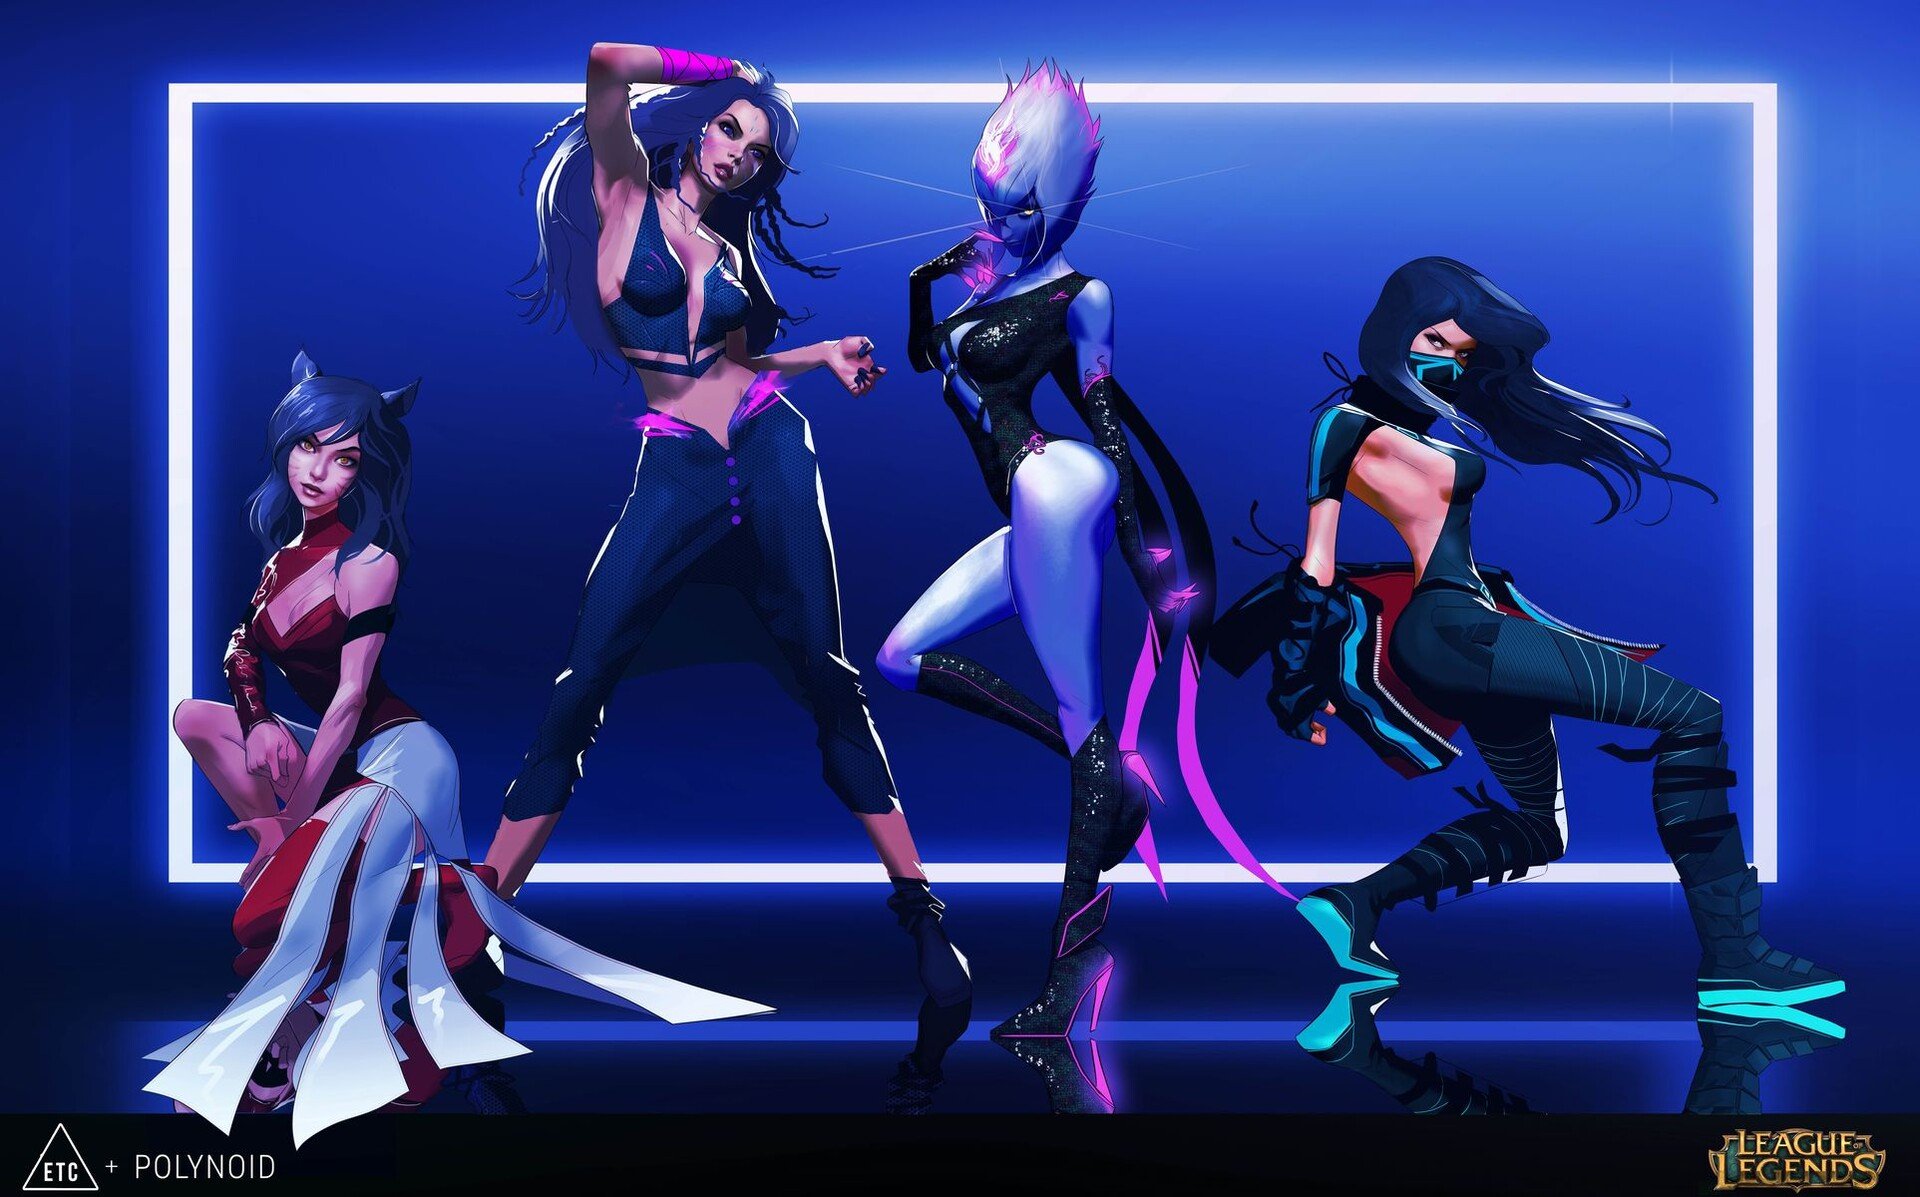 Hex Twitter: - POP/STARS (ft. Madison Beer, (G)I-DLE, Jaira Burns) | Music Video - League of Legends" Pitch Concept Art - League of Legends by ALICE in LA Studio "